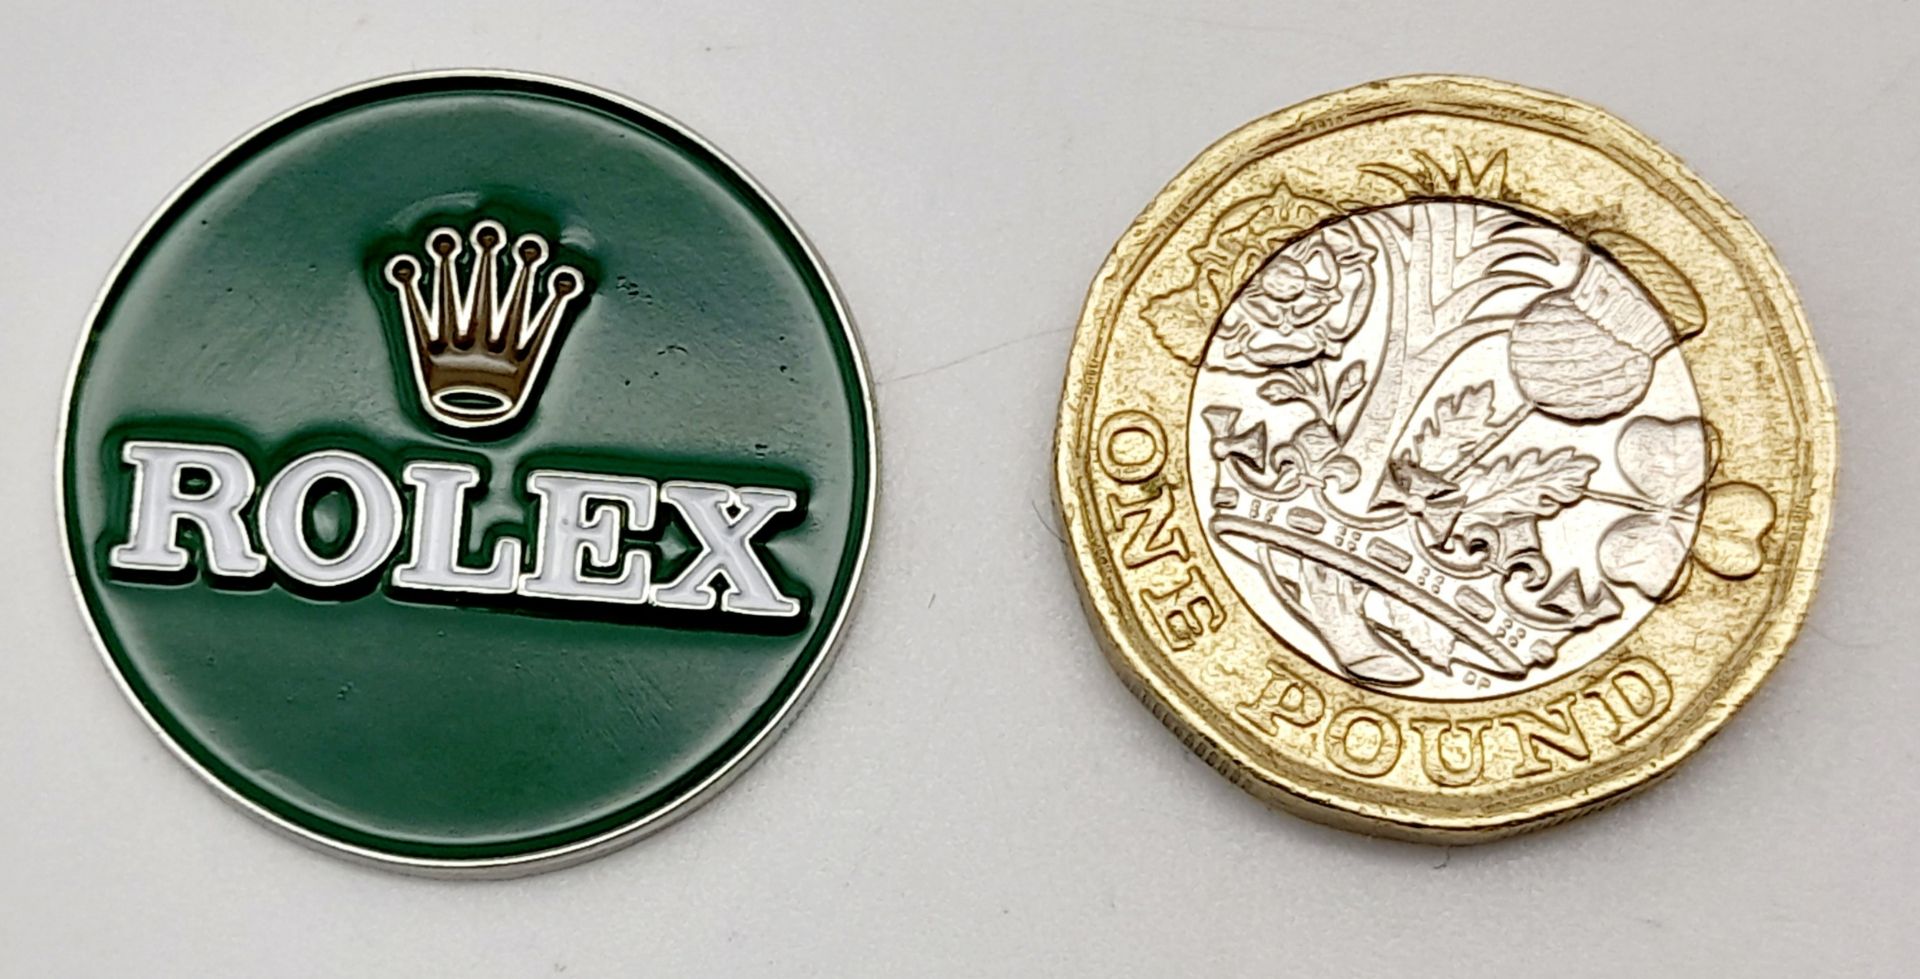 A Rolex Branded Retractable 'Flick' Golf Putting Divot Repair Tool. Removable magnetic ball marker - - Bild 4 aus 4